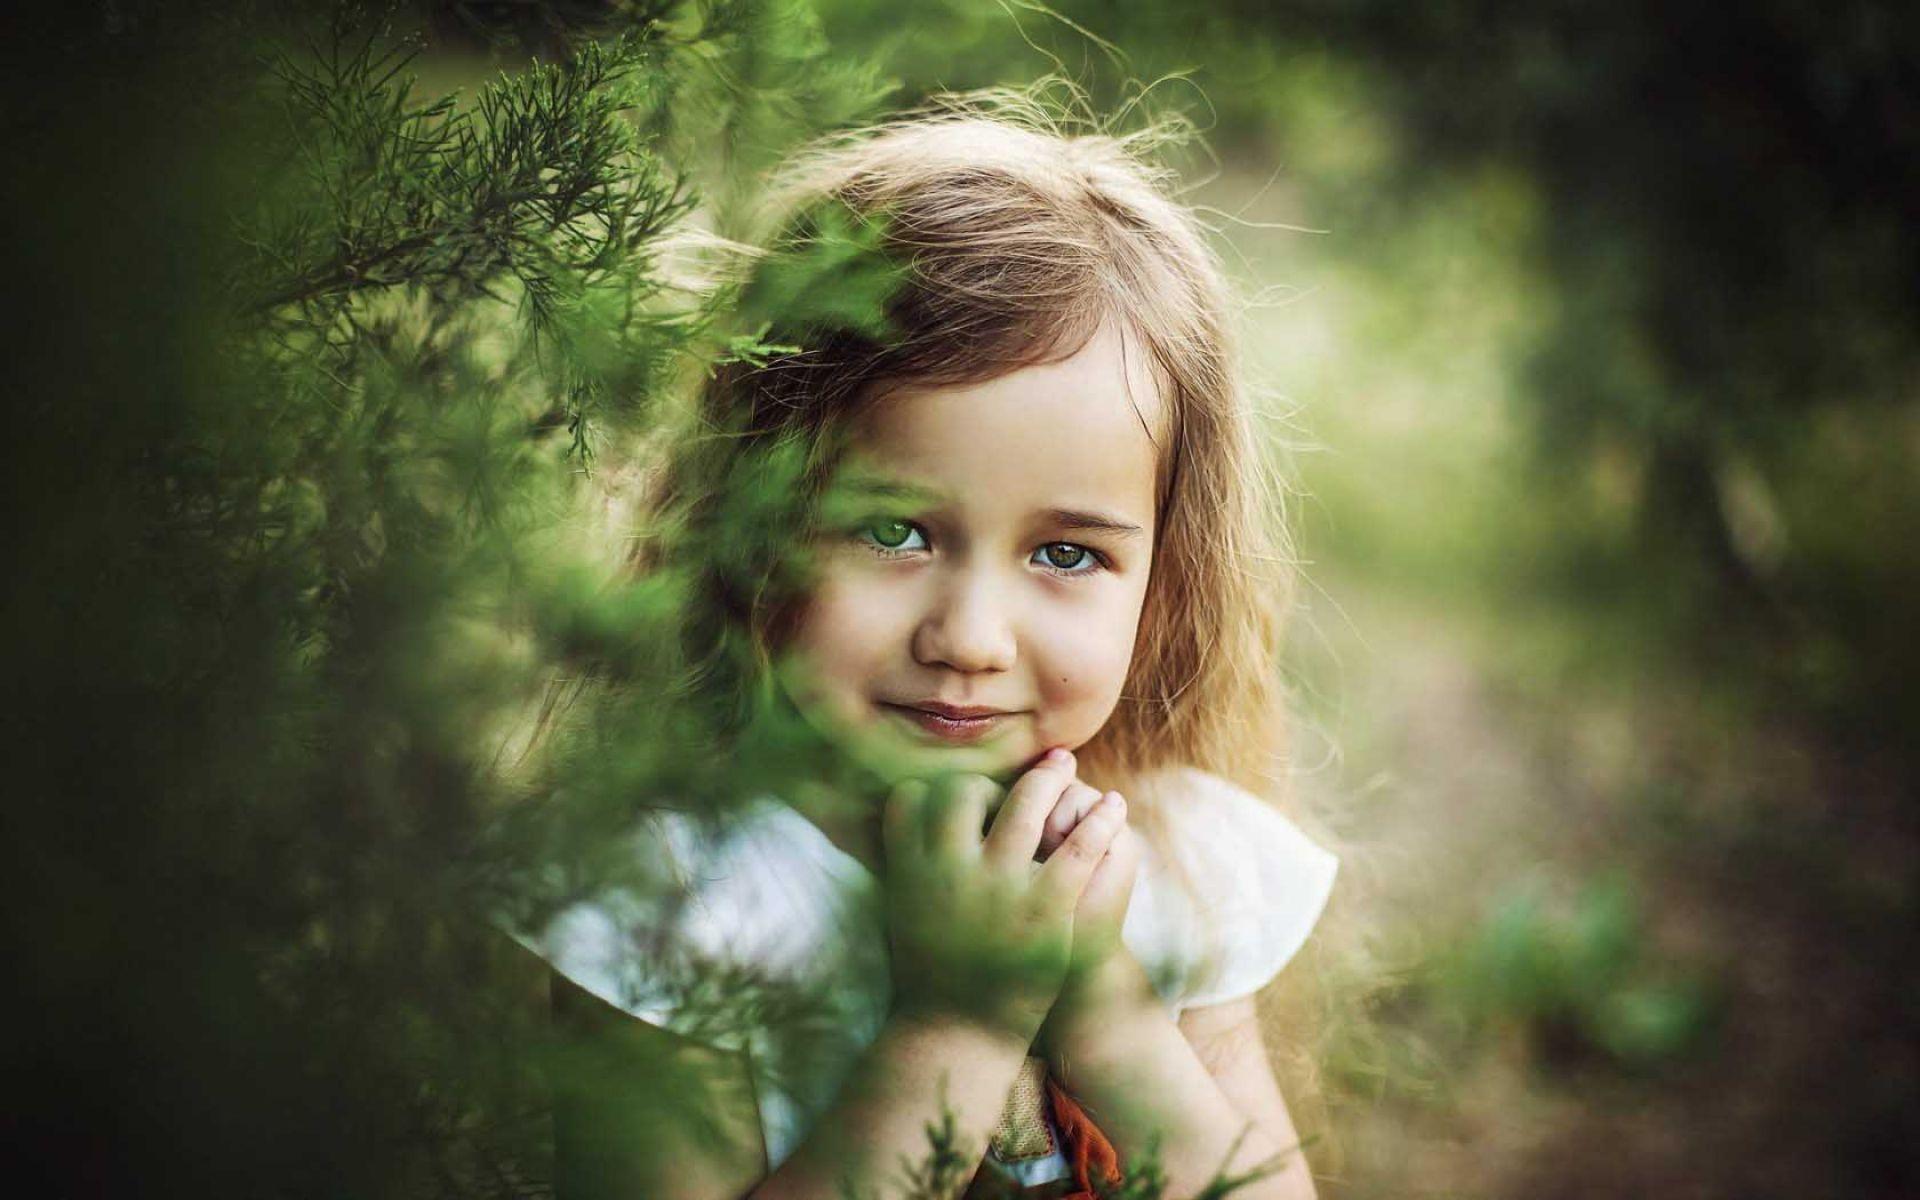 Cute Girl Child Wallpapers - Wallpaper Cave